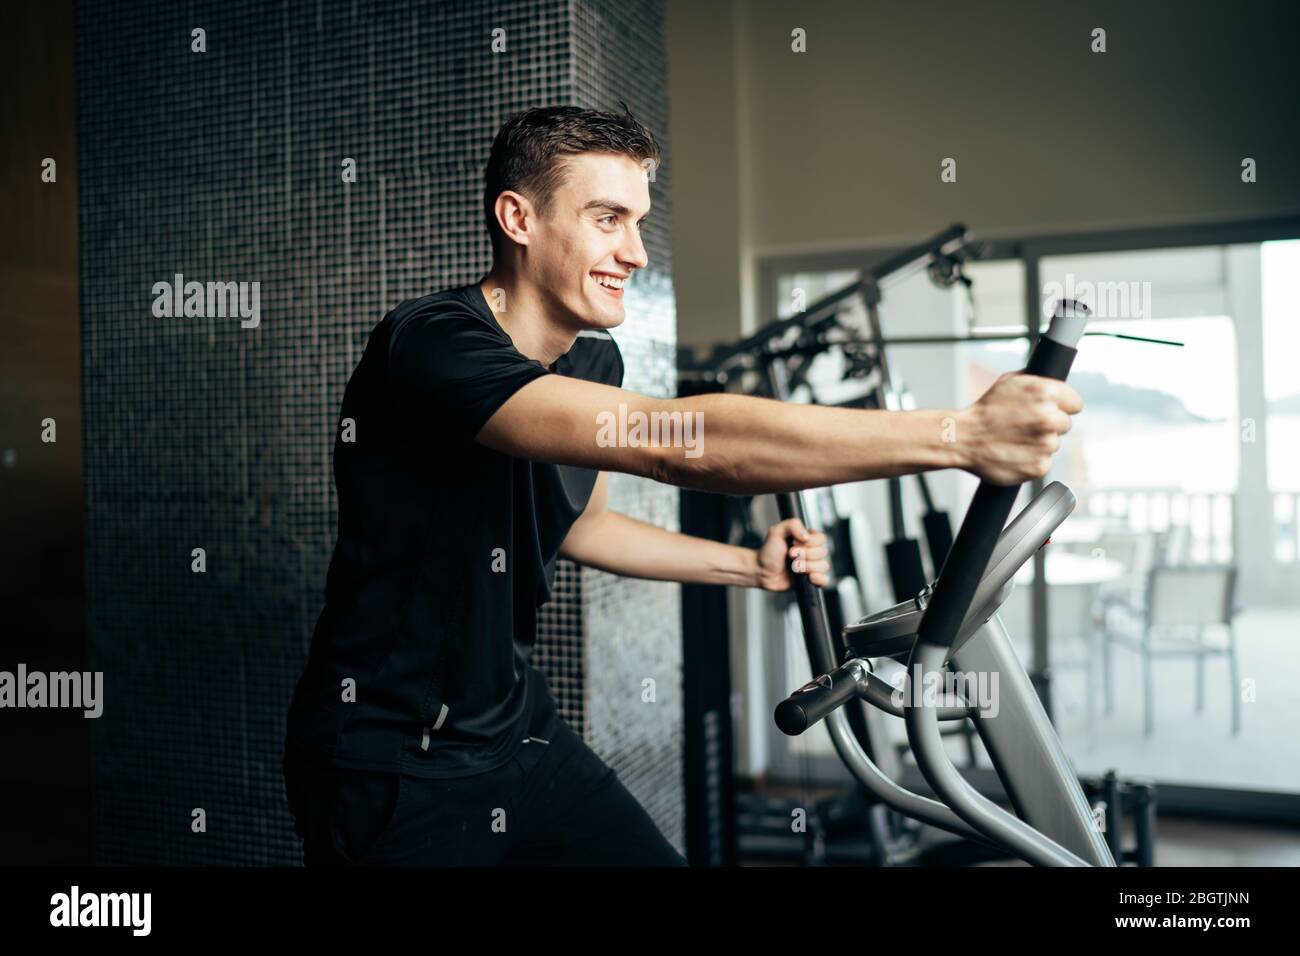 Young man doing fitness exercises on stepper at home gym.Making an effort and training for fit body shape,weight loss.Excess body weight.Home workout. Stock Photo